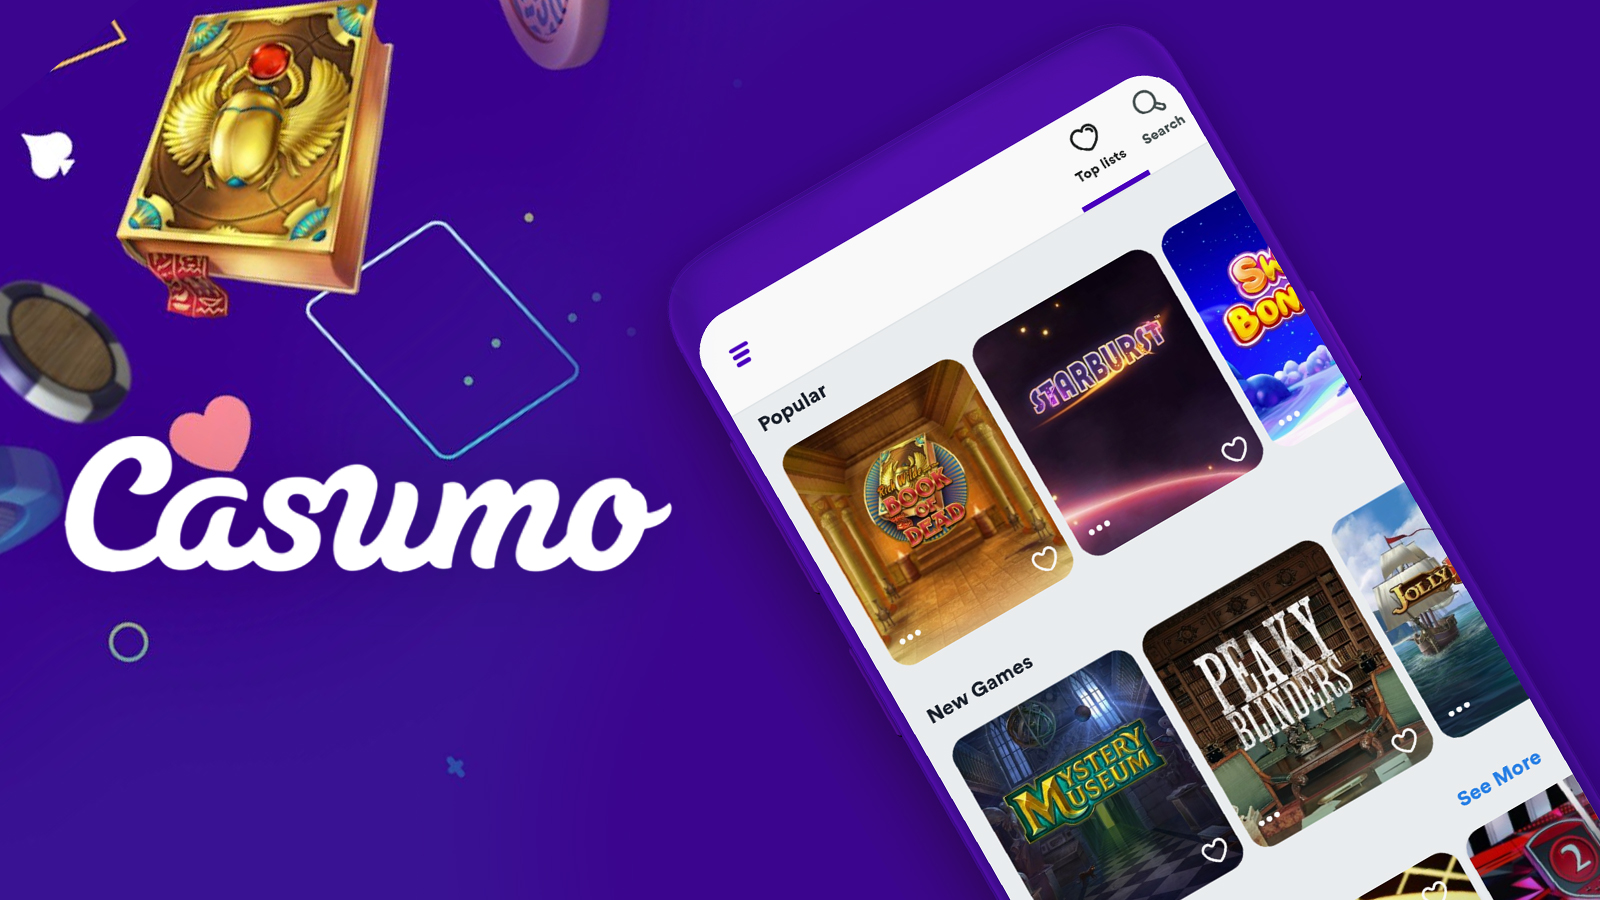 Download and install the Casuno mobile app to play casino games any time you want.